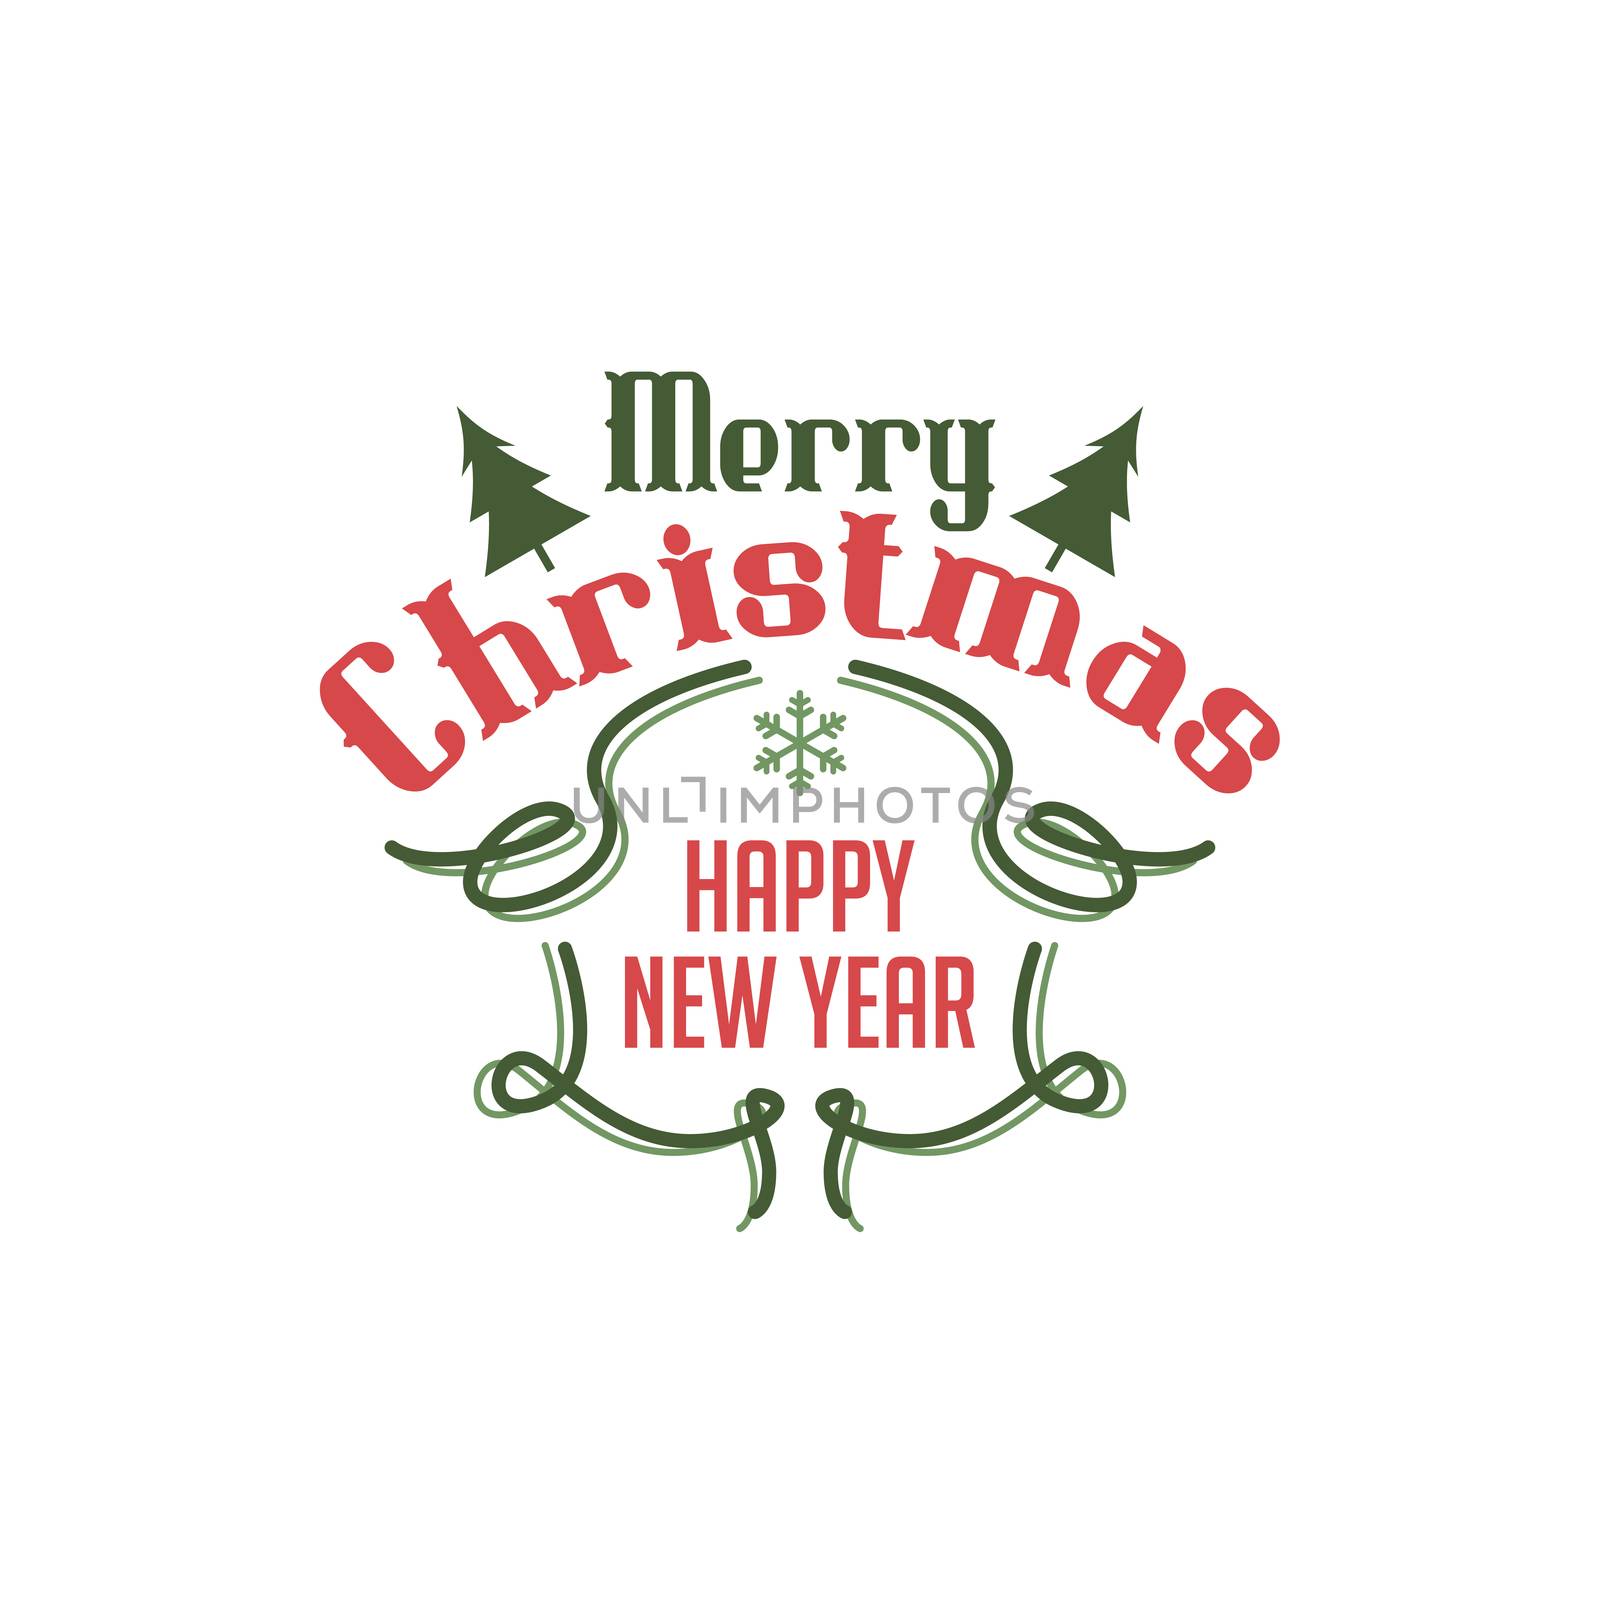 merry christmas label and badge theme vector illustration